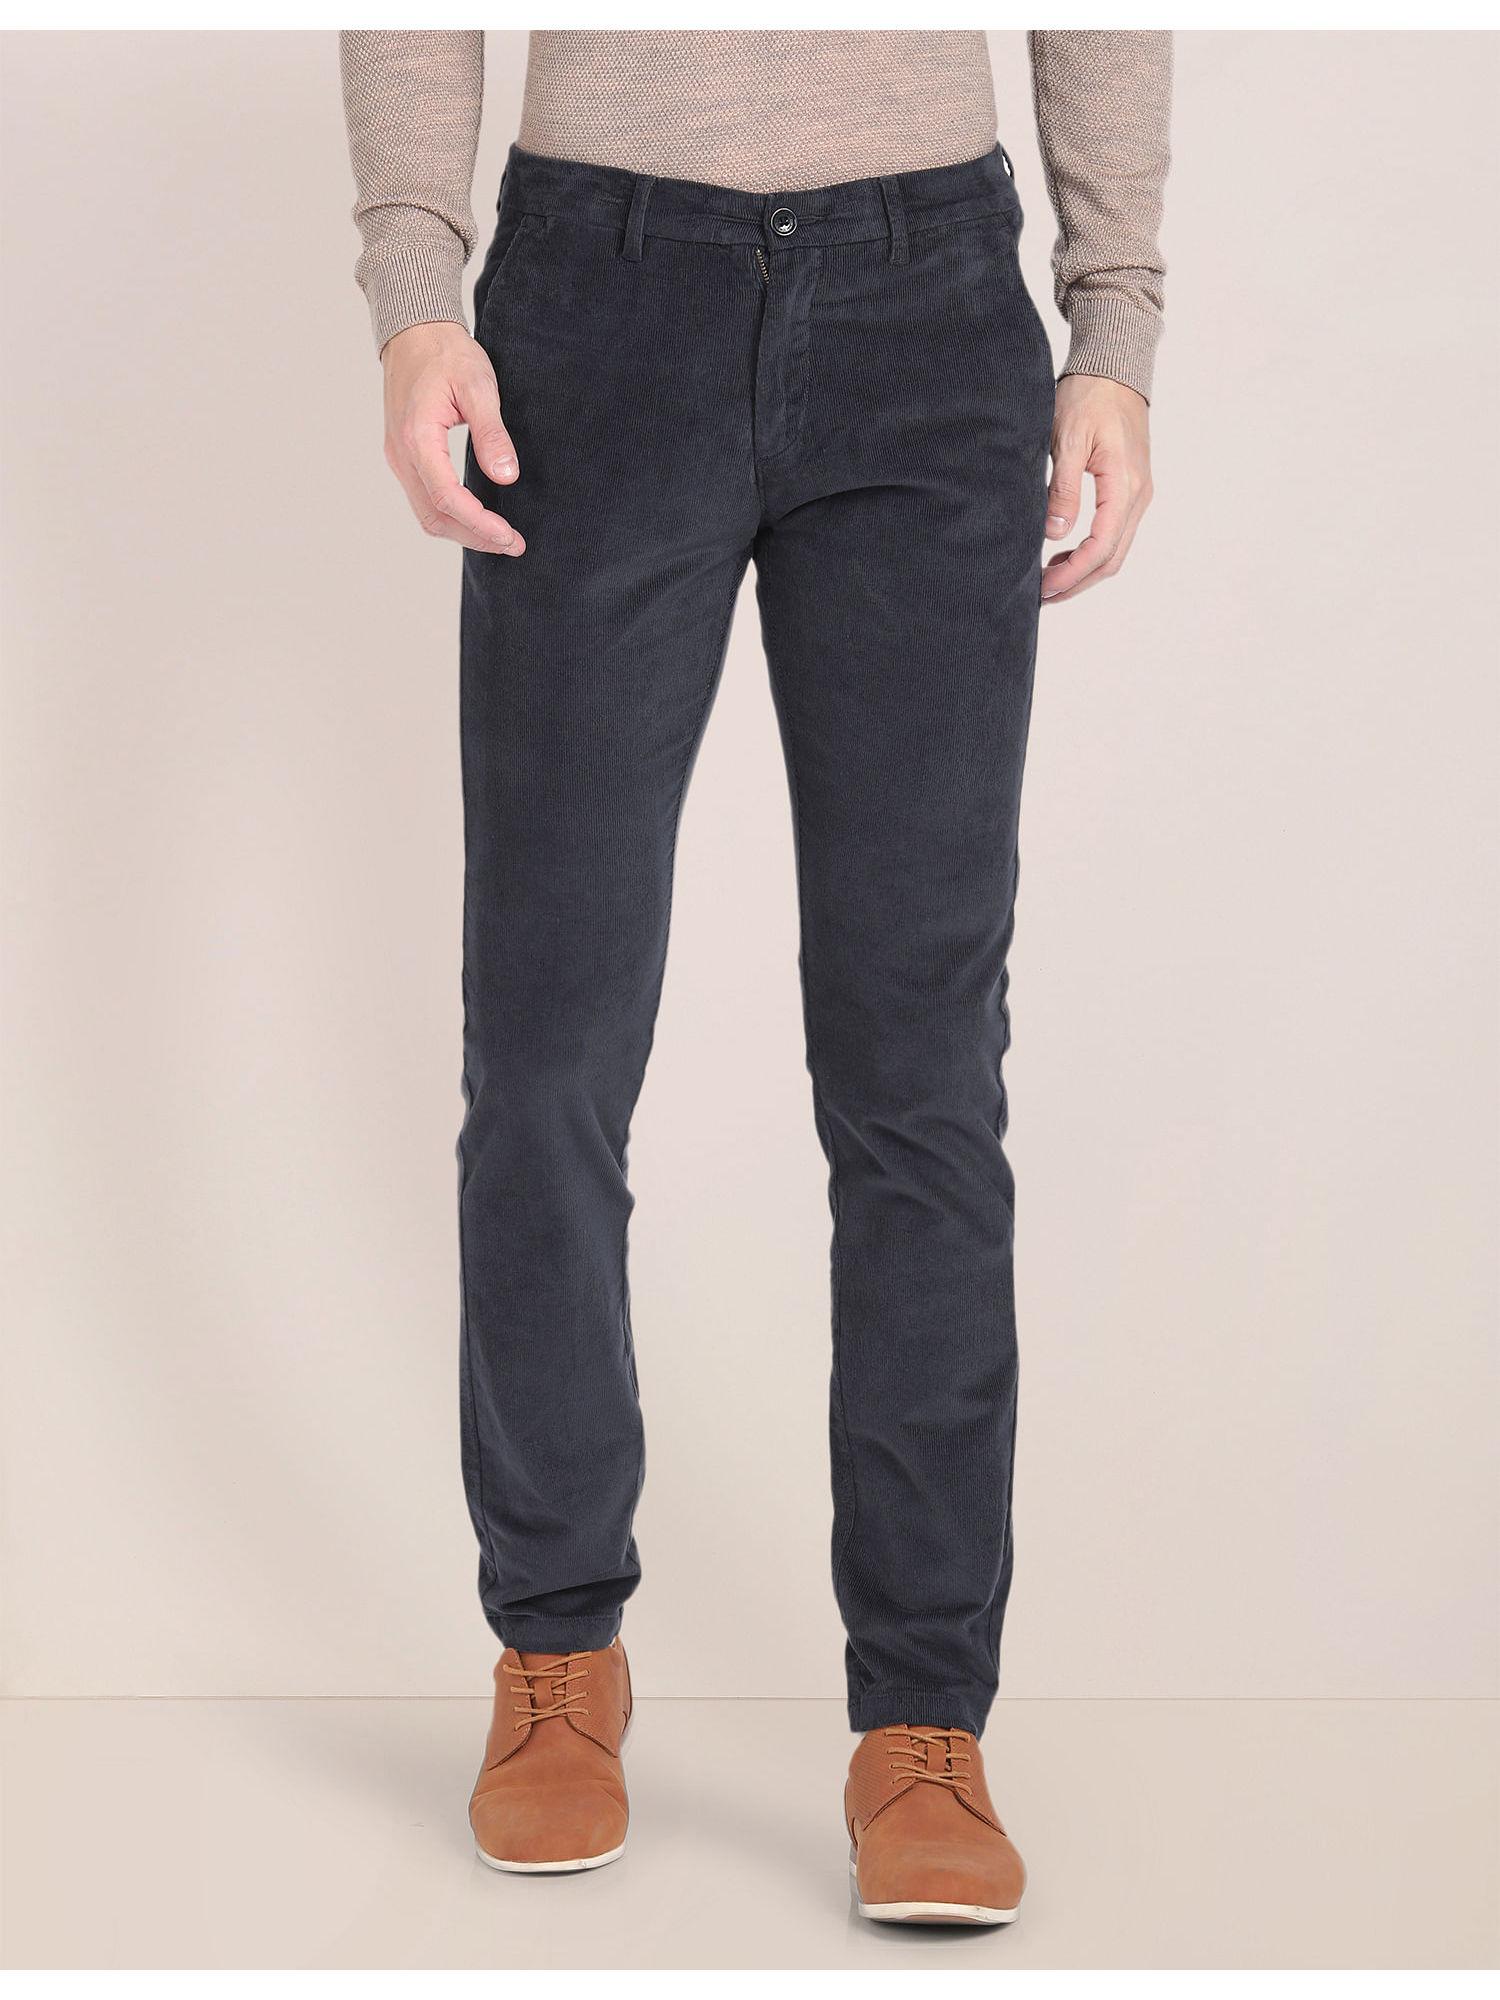 navy blue cotton stretch corduroy casual trousers